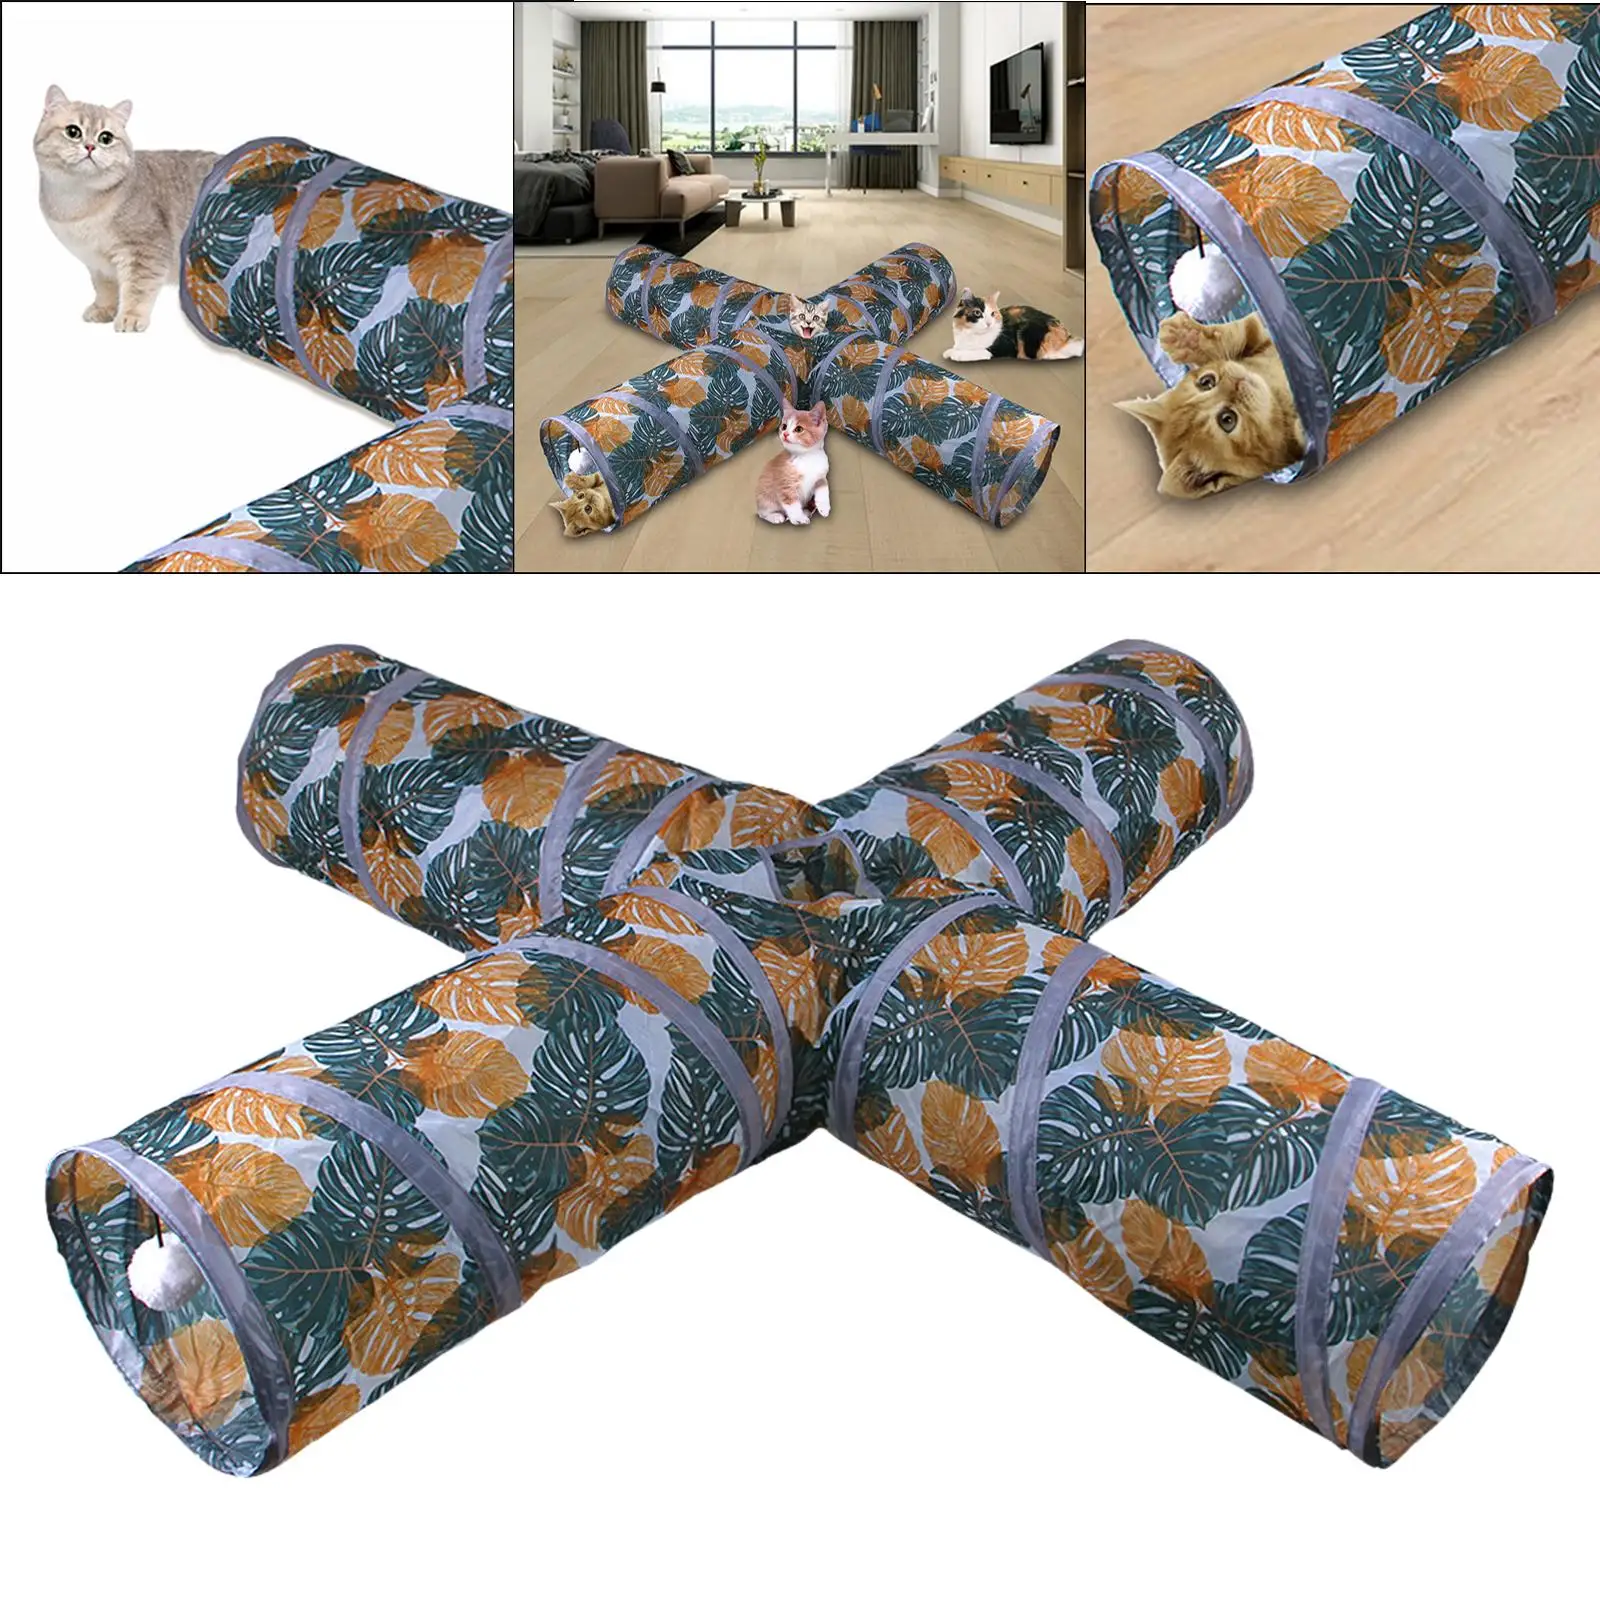 

Soft Cat Tunnel Tube Pet Collapsible Toy Play Tent Bed with Ball Kitten for Pet Supplies Rabbits Sugar Glider Mice Rats